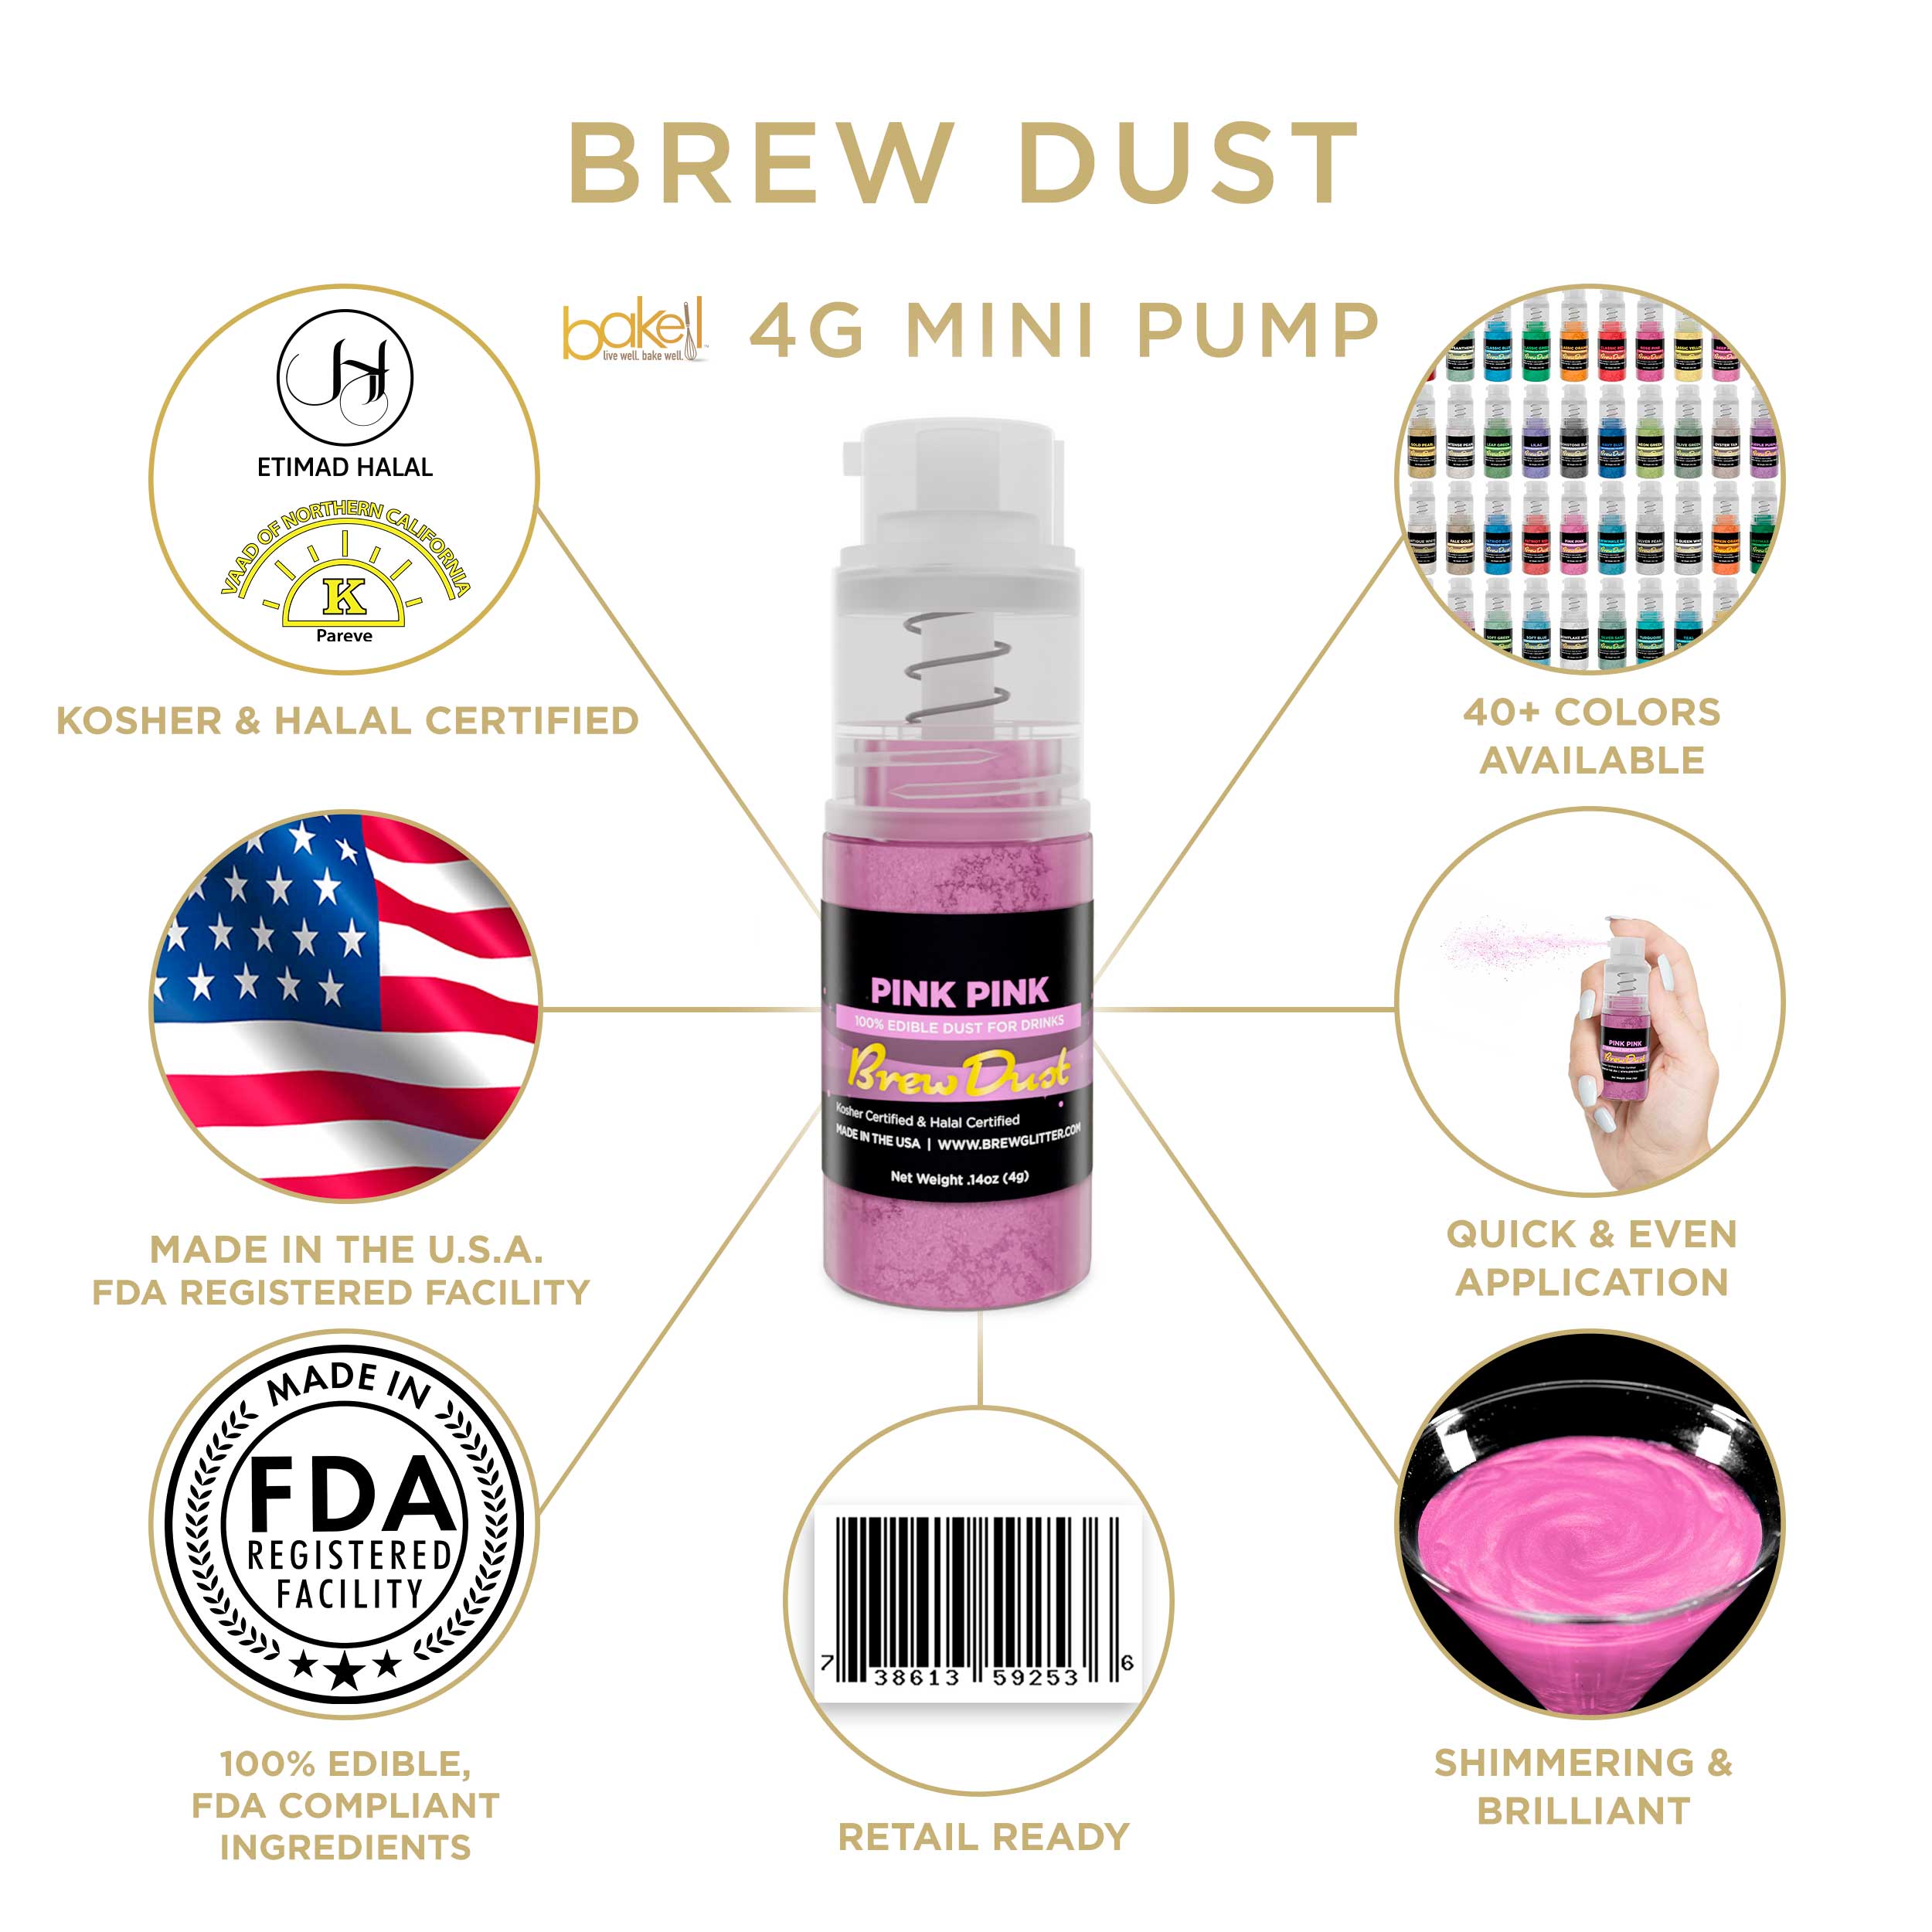 Pink Pink Brew Dust Miniature Spray Pump | Infographic and Information